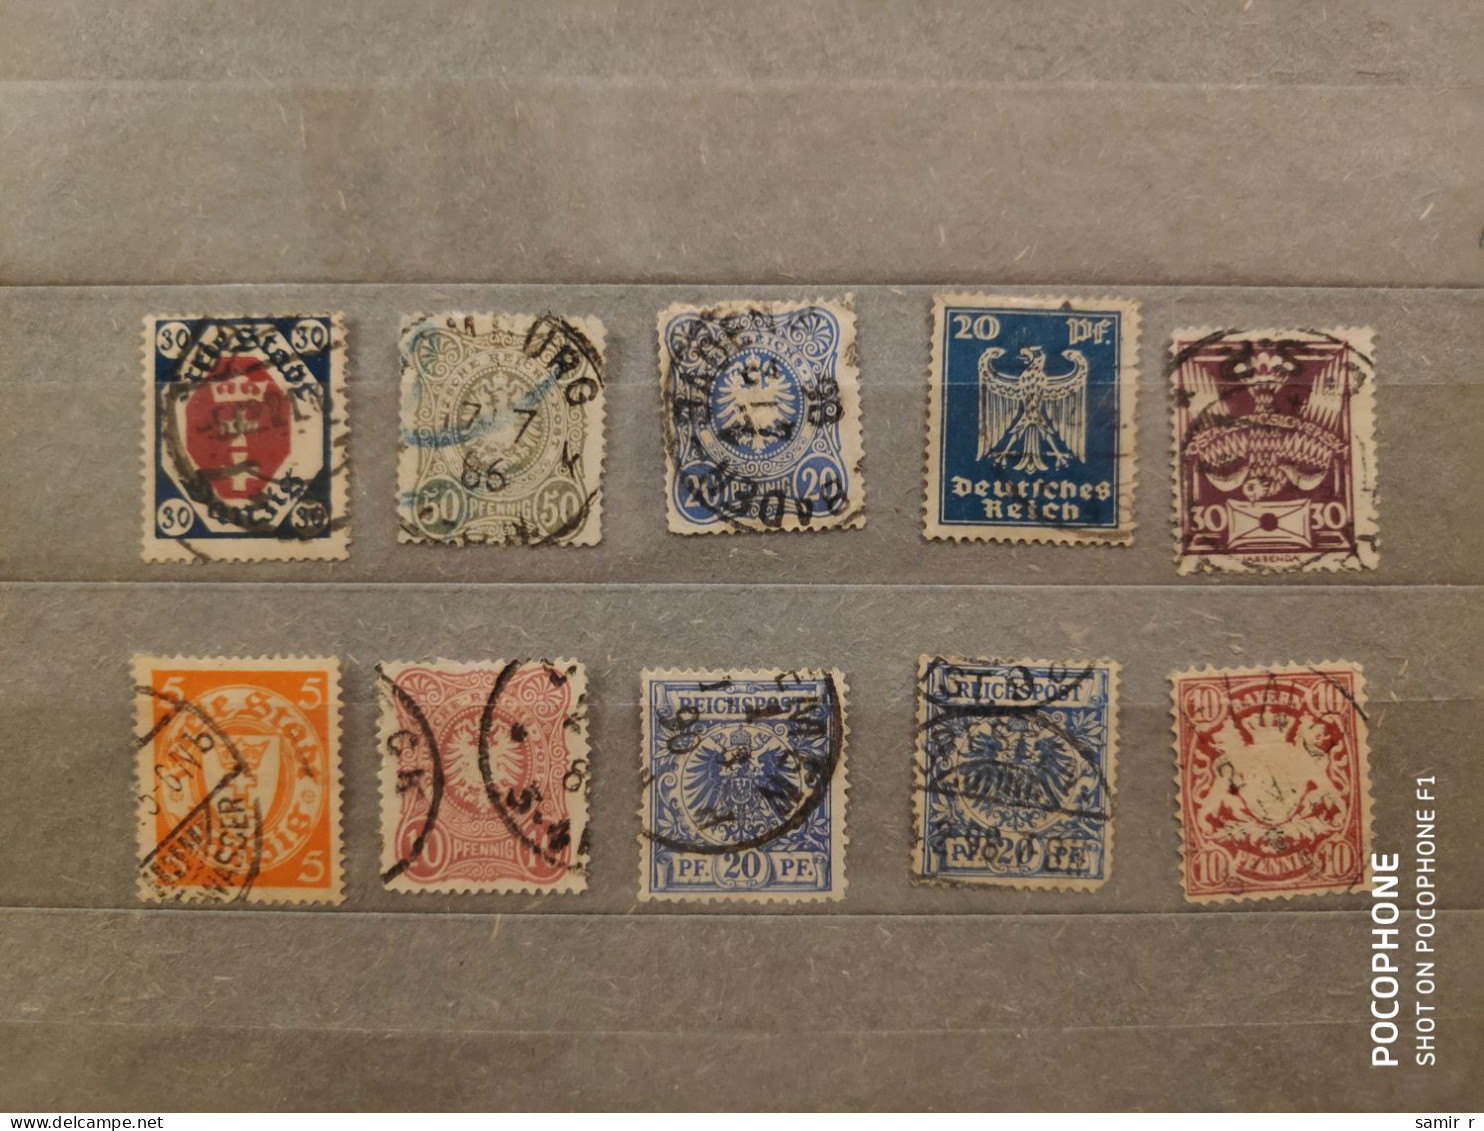 Germany	Reich Coat Of Arms (F96) - Used Stamps